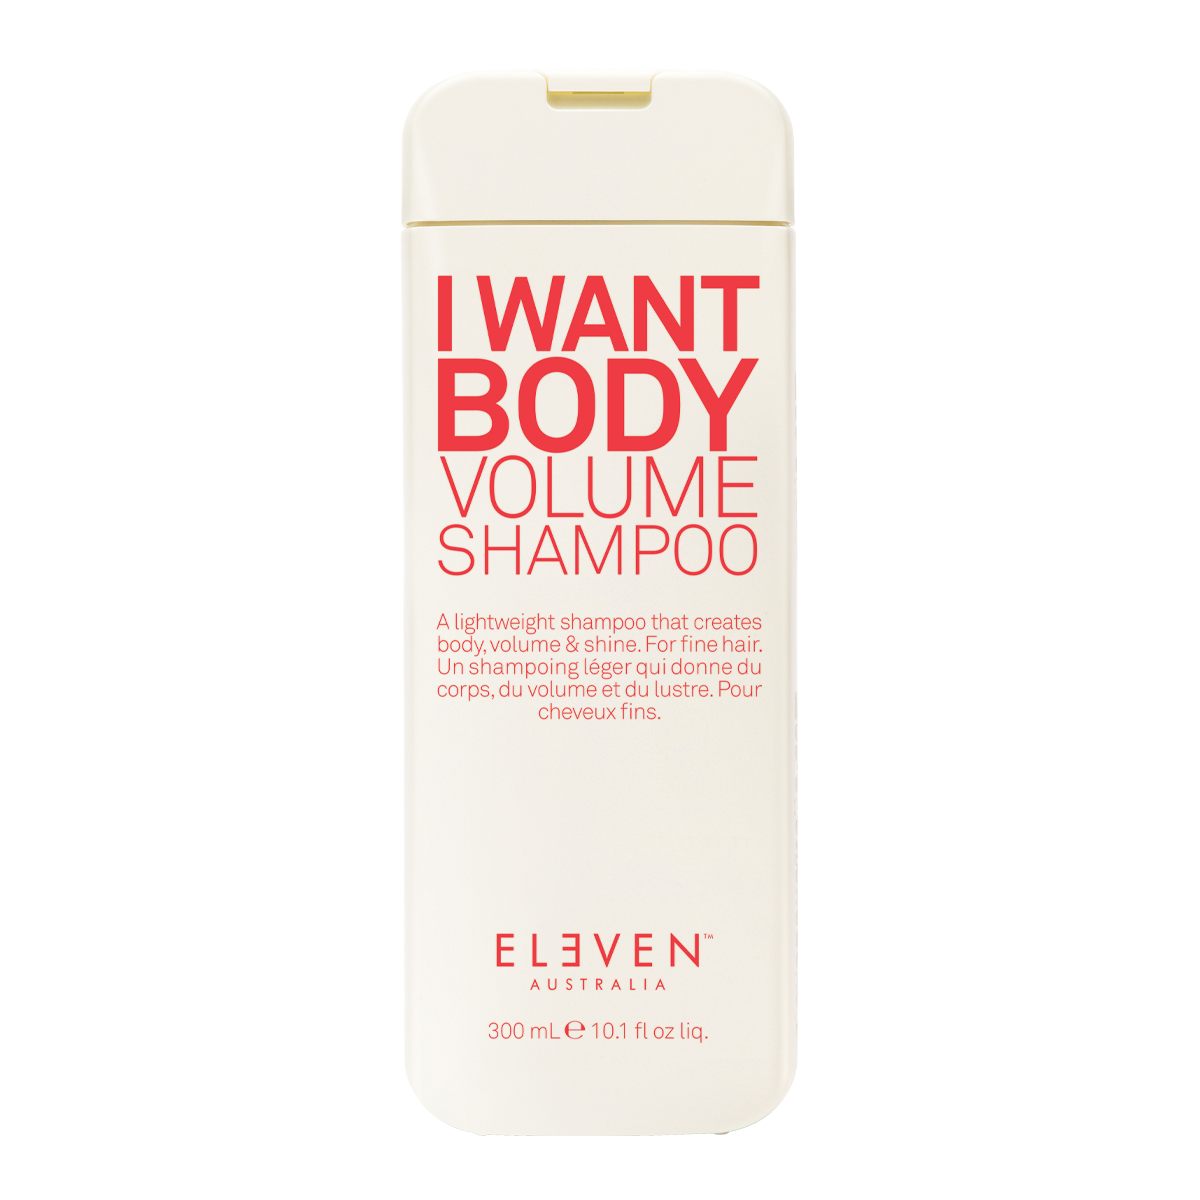 Shampooing I want Body Volume Stalter Coiffeur strasbourg